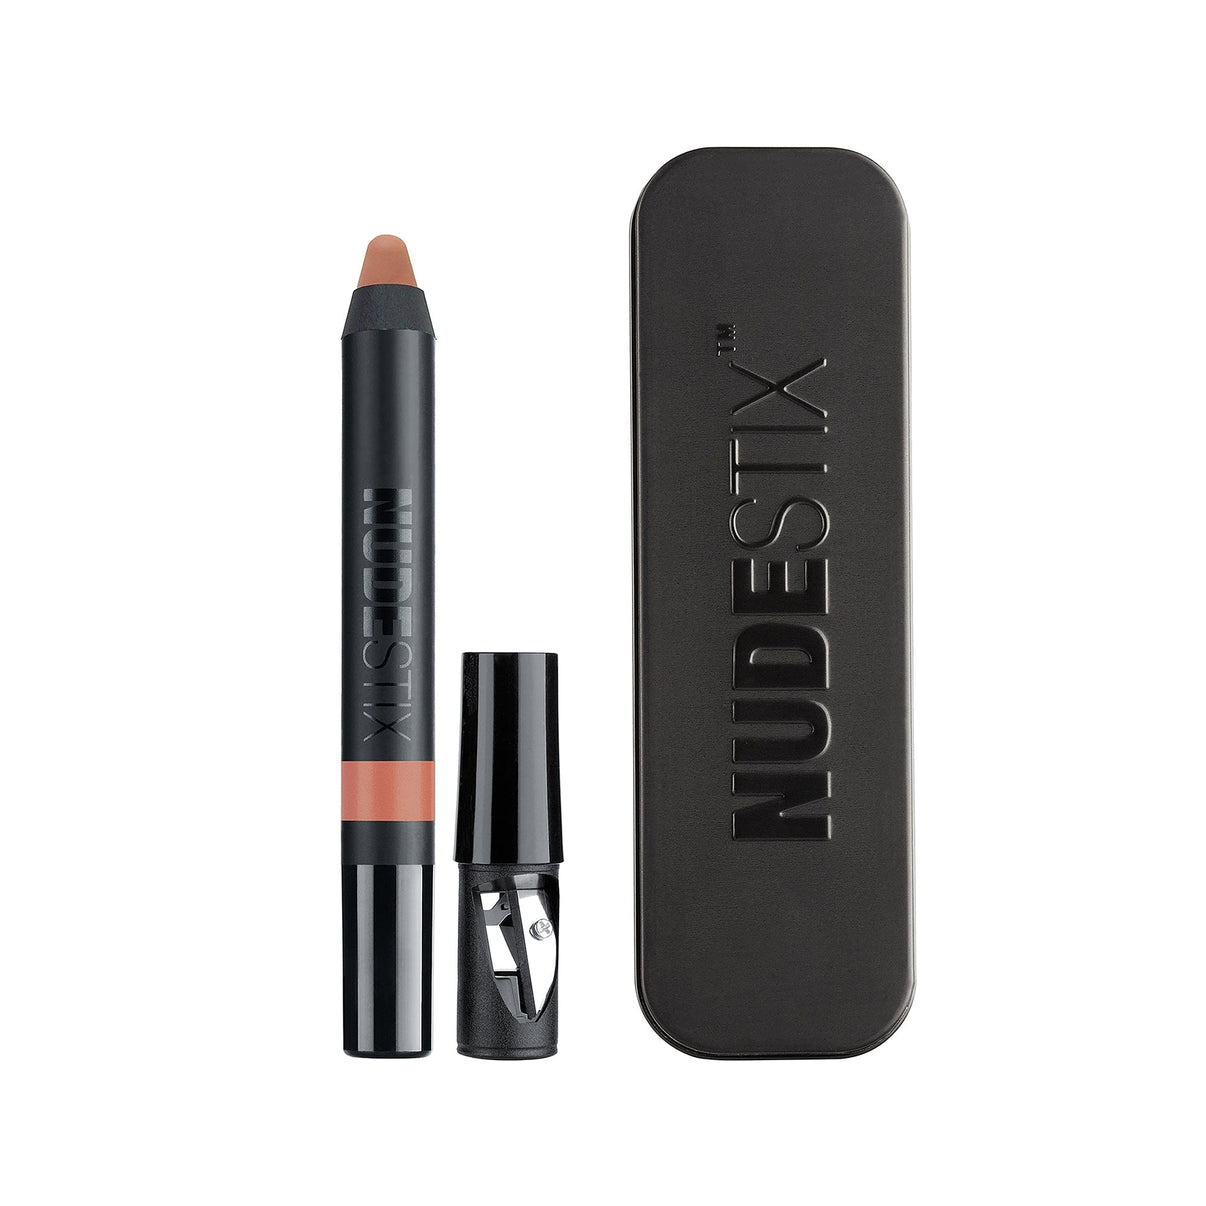 Intense Matte Lip + Cheek pencil in shade entice with sharpener and nudestix can